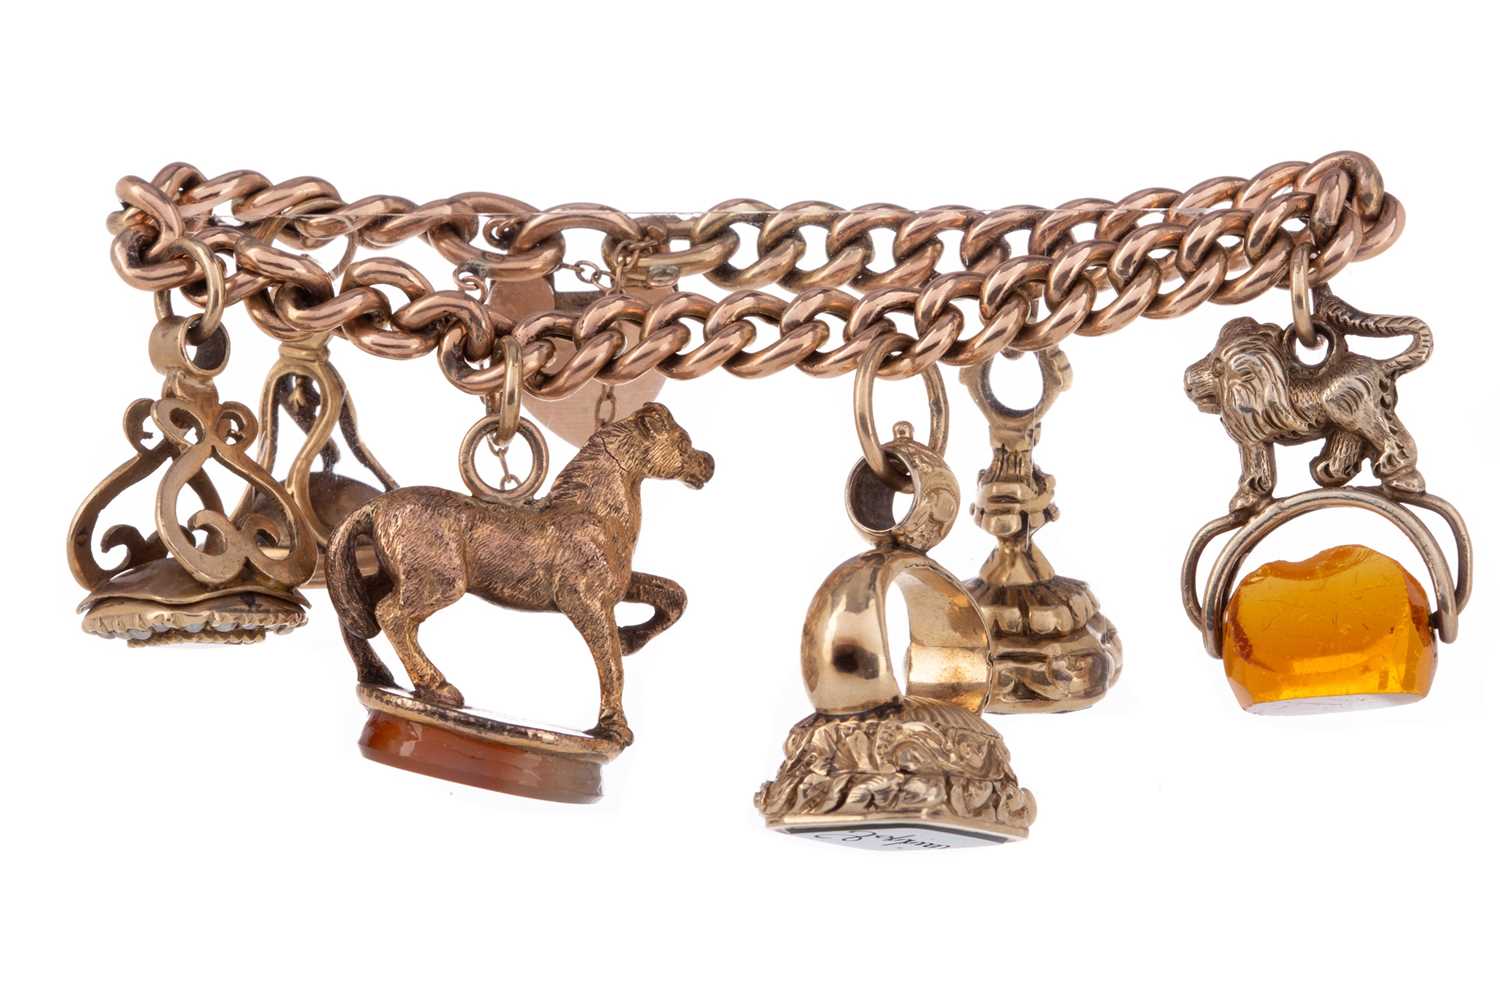 Lot 414 - A GOLD SEAL FOB CHARM BRACELET ALONG WITH A SEAL FOB PENDANT ON CHAIN